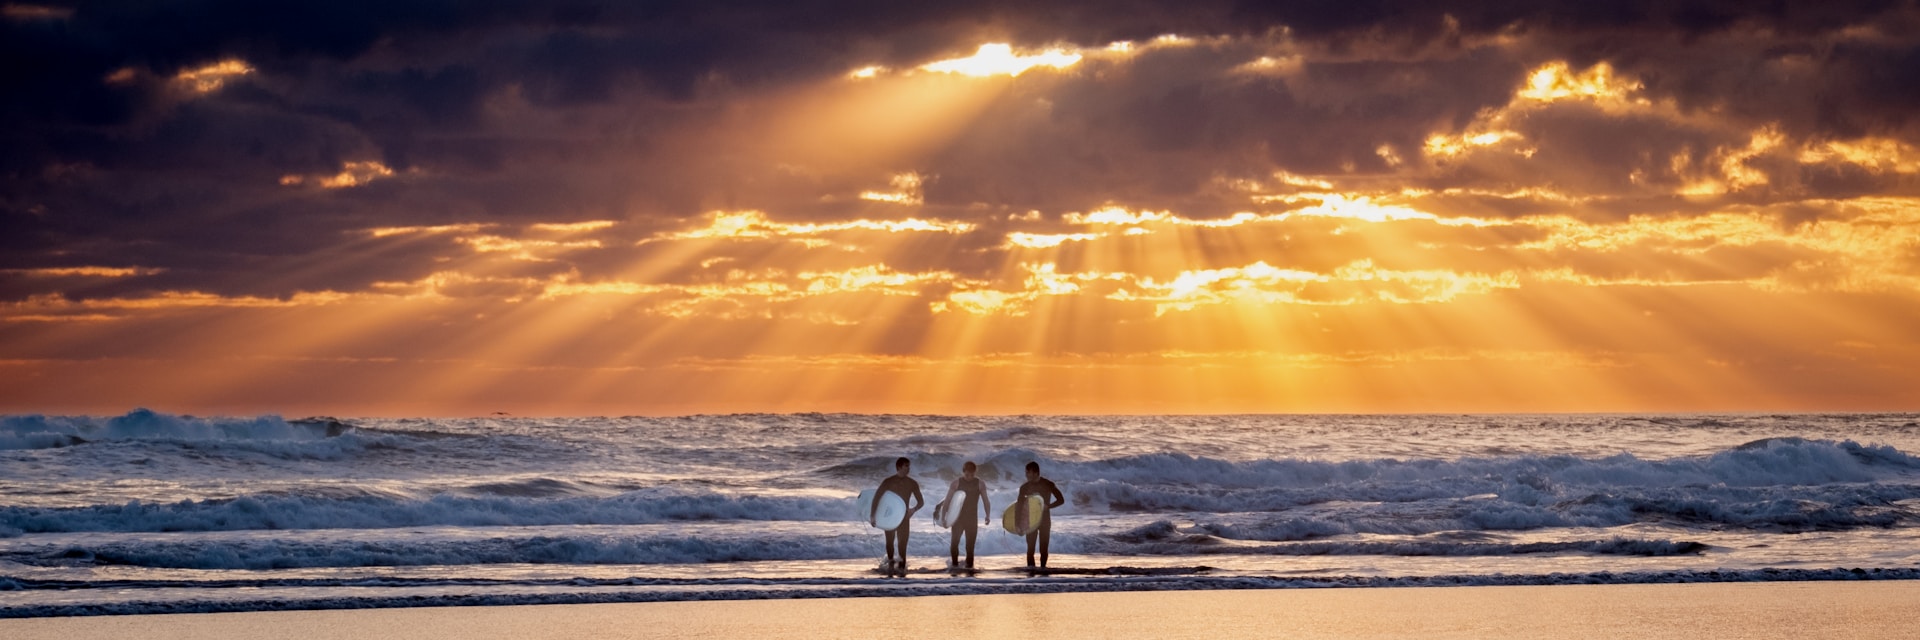 photo - three surfers walking towards the ocean at the best time to surf with beautiful clouds covering late afternoon sun